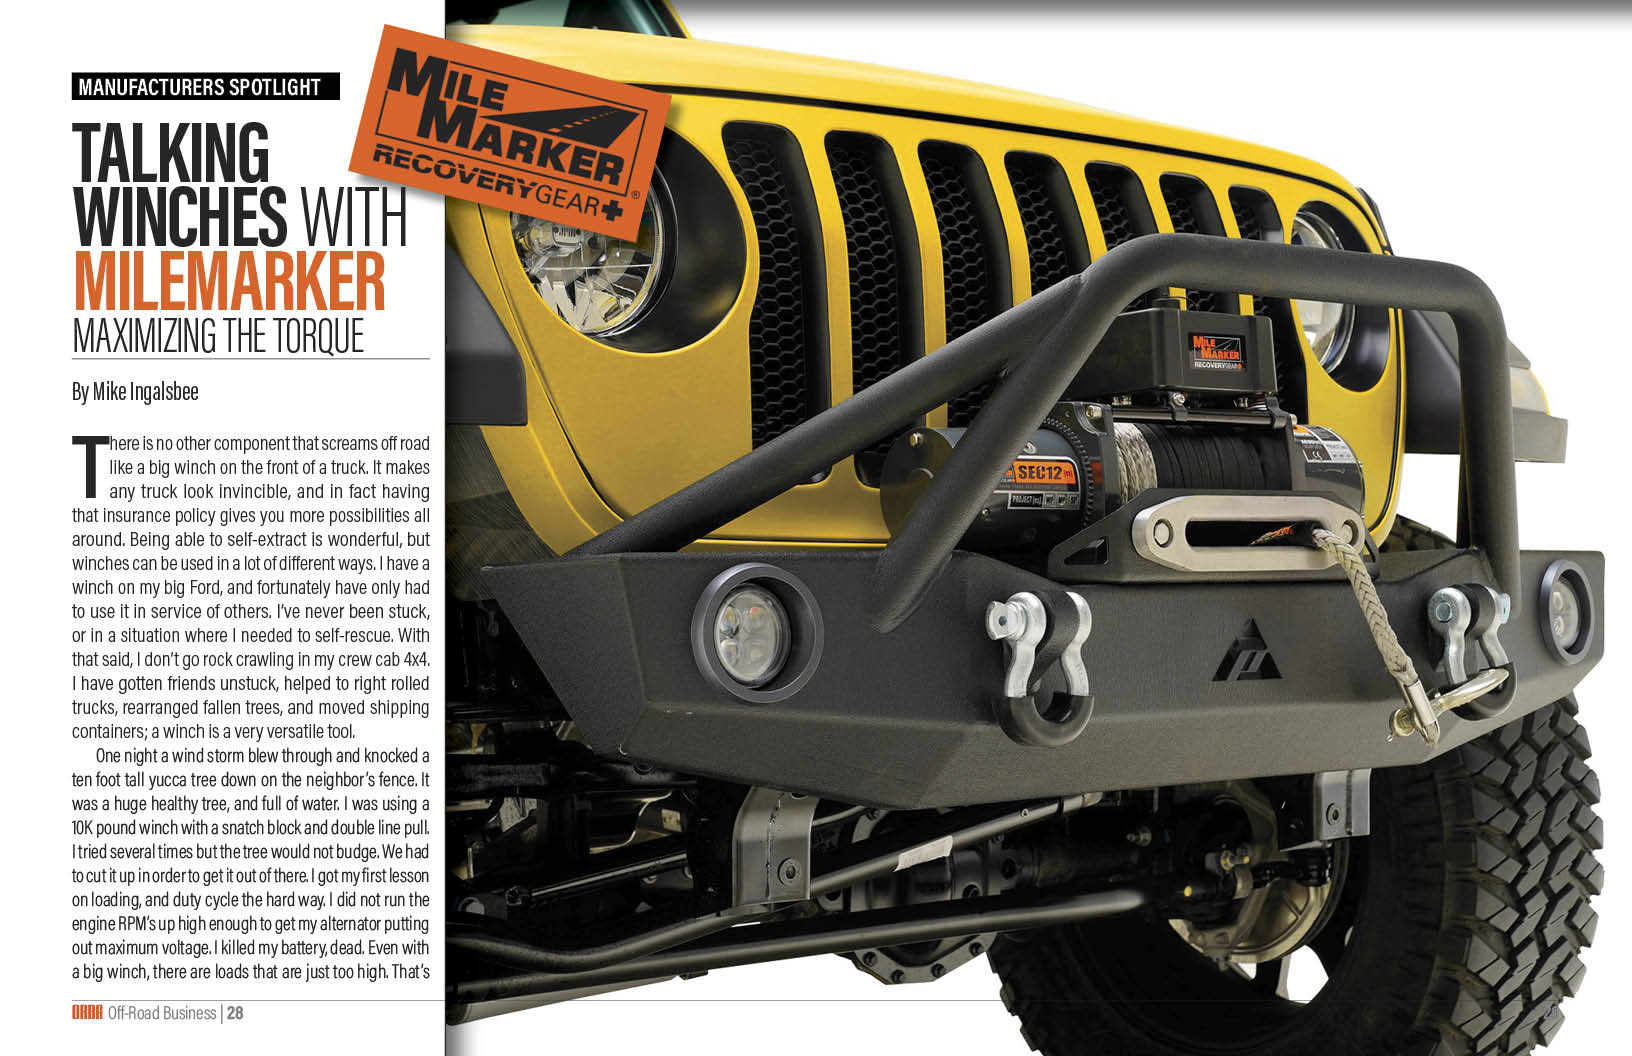 Talking winches with MileMarker
- Maximizing The Torque